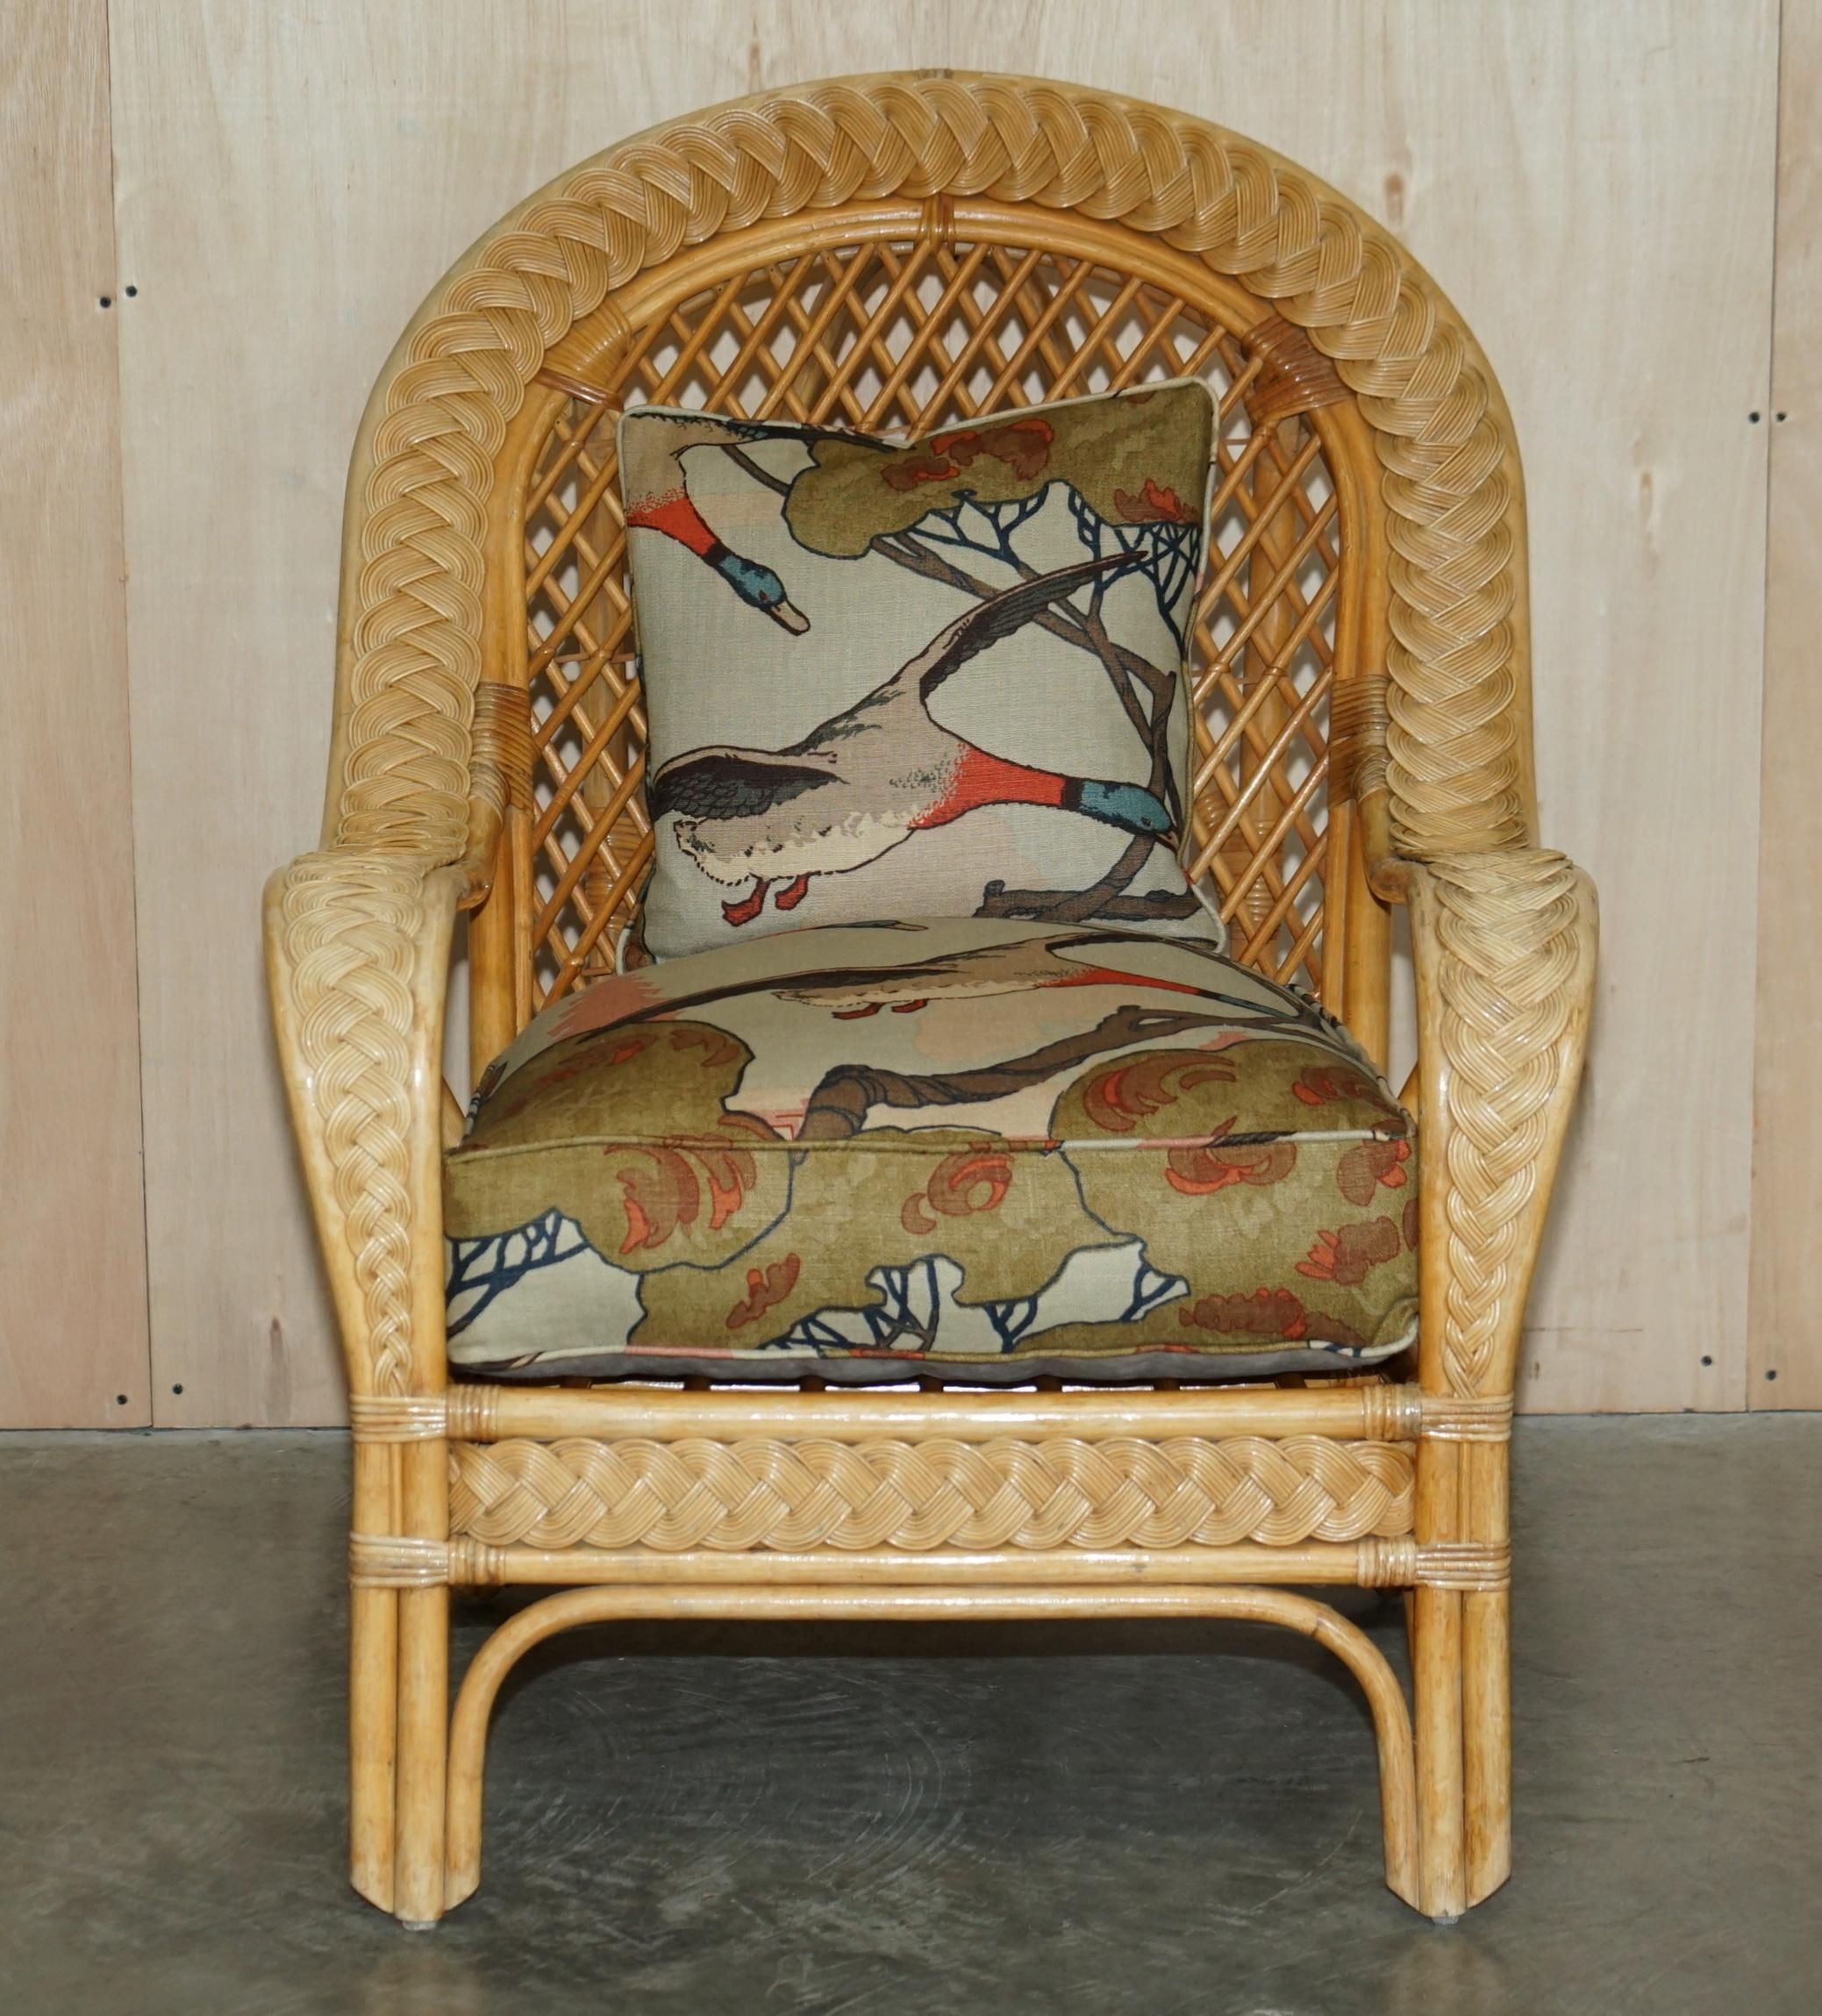 WICKER ARMCHAIRS STOOL TABLE SUITE UPHOLSTERED WiTH MULBERRY FLYING DUCKS FABRIC For Sale 4